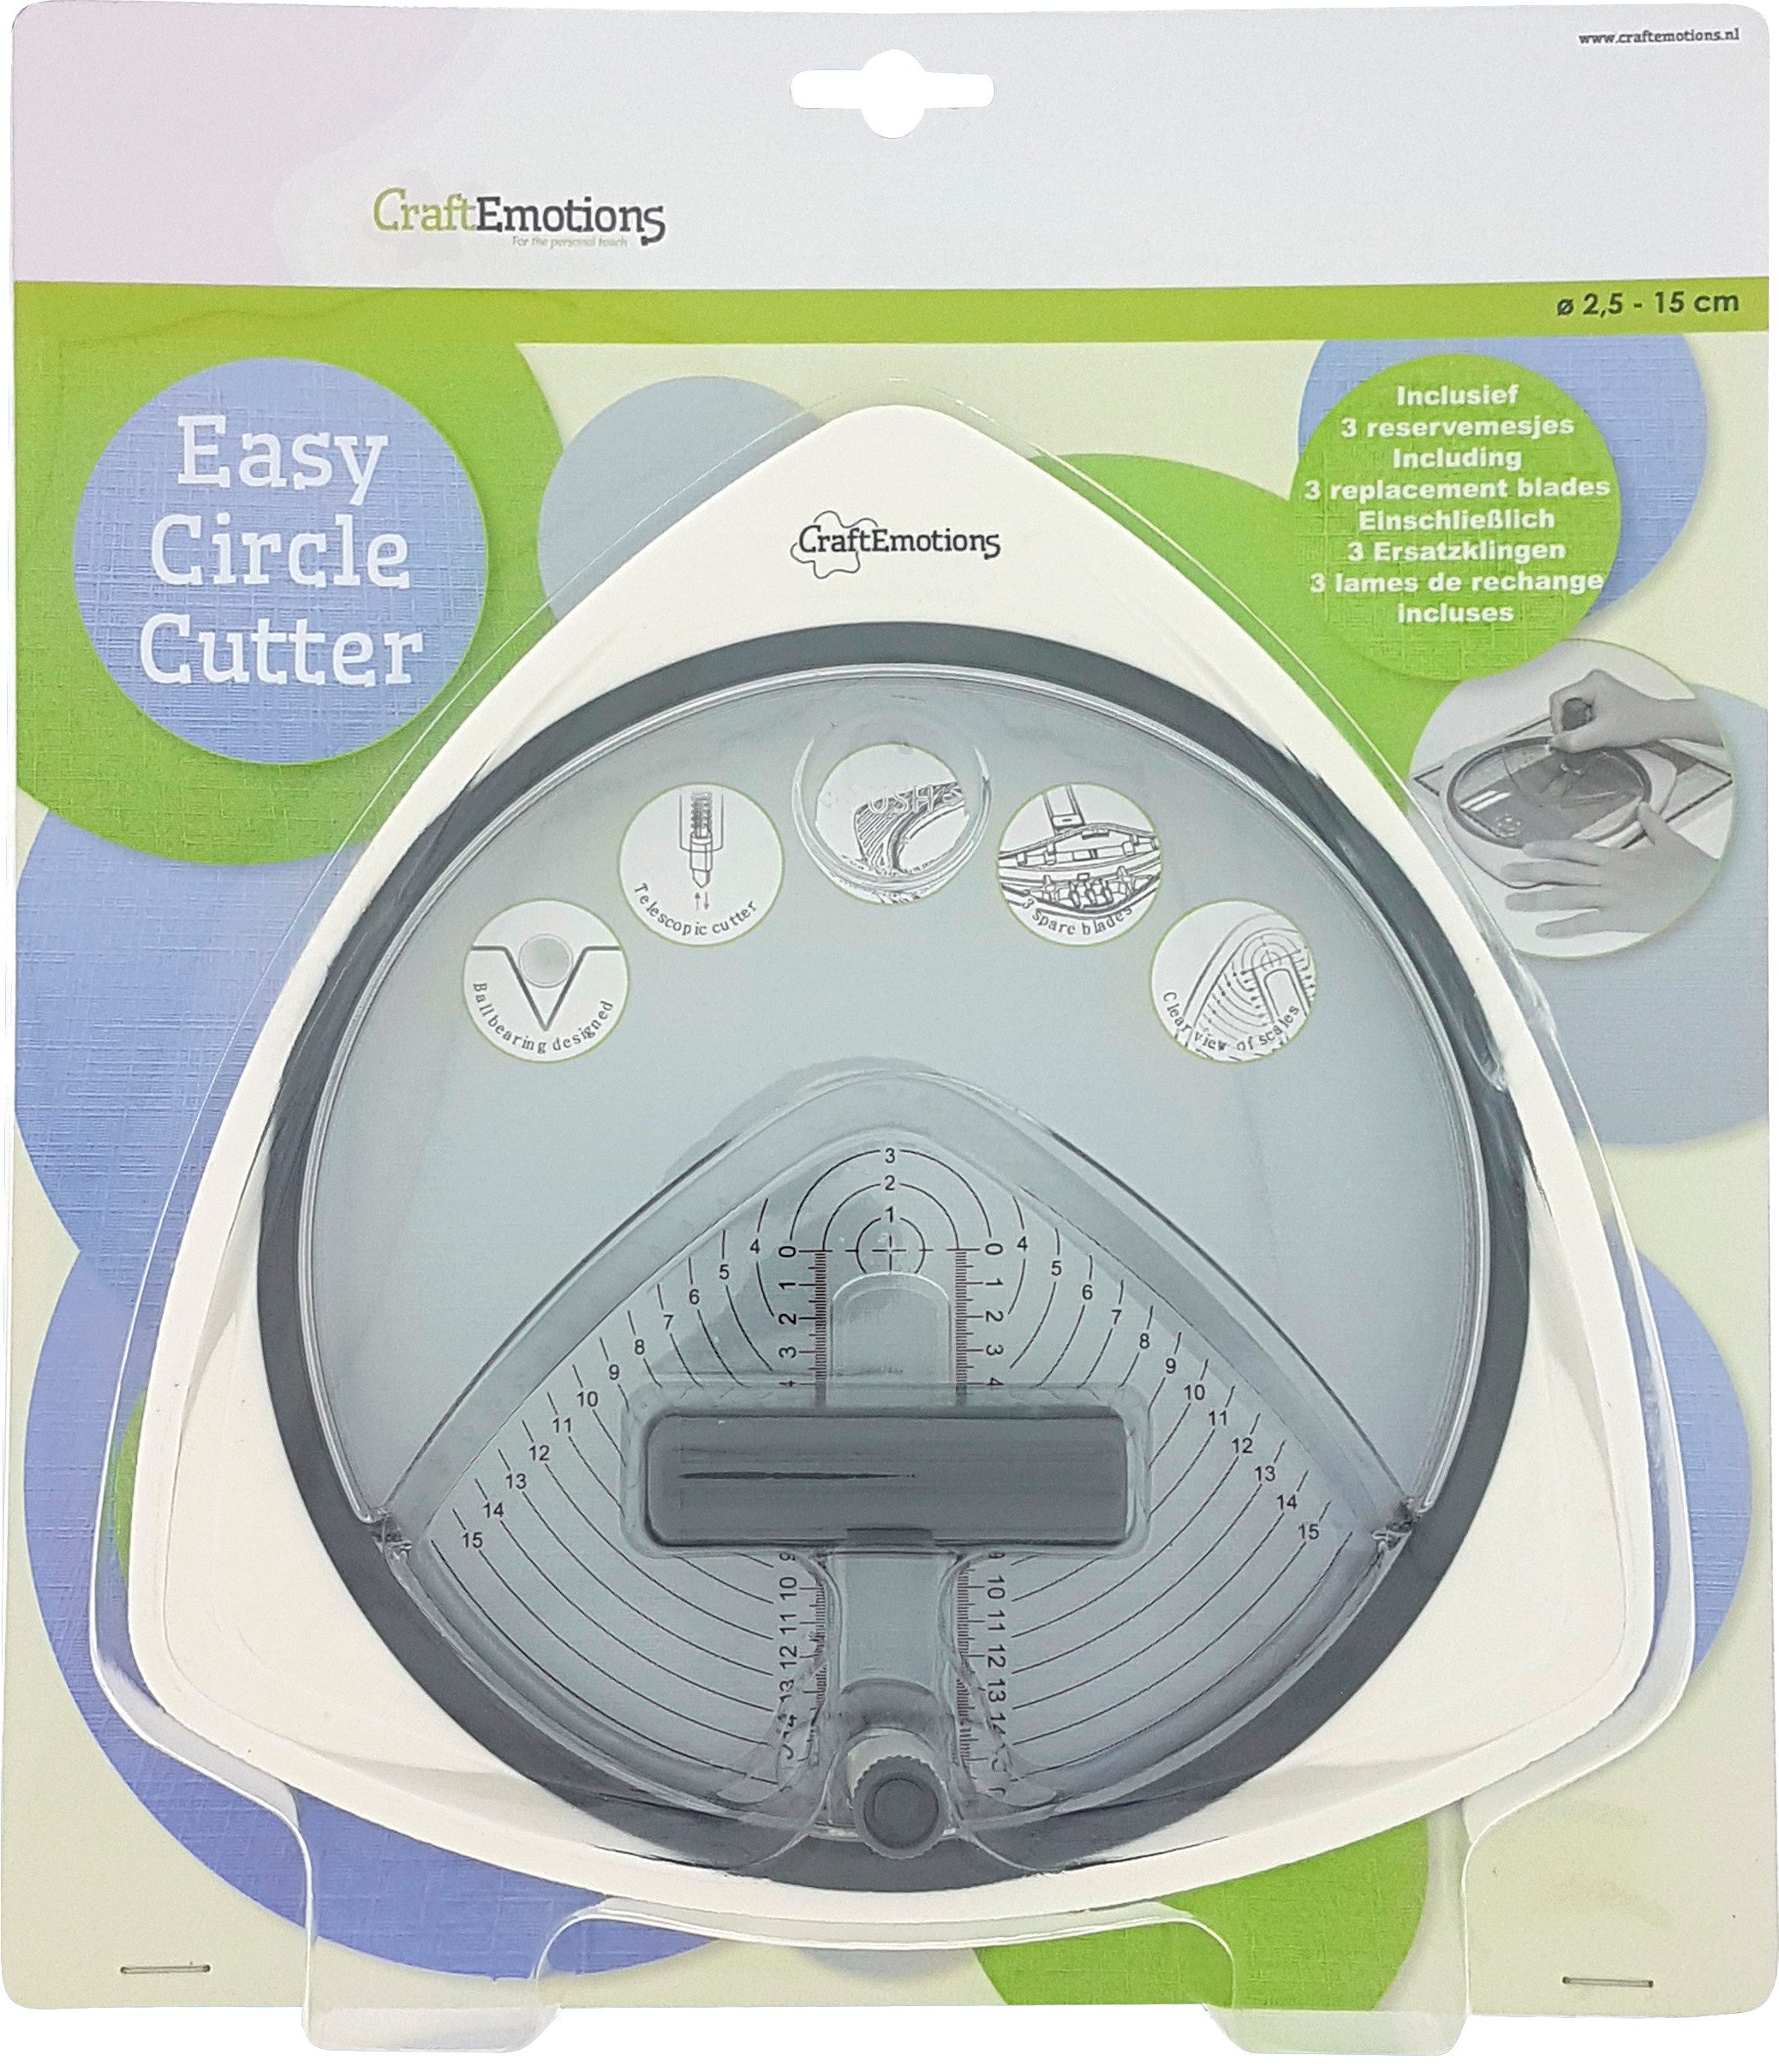 CraftEmotions Teppichmesser Easy Circle Cutter, 22 cm